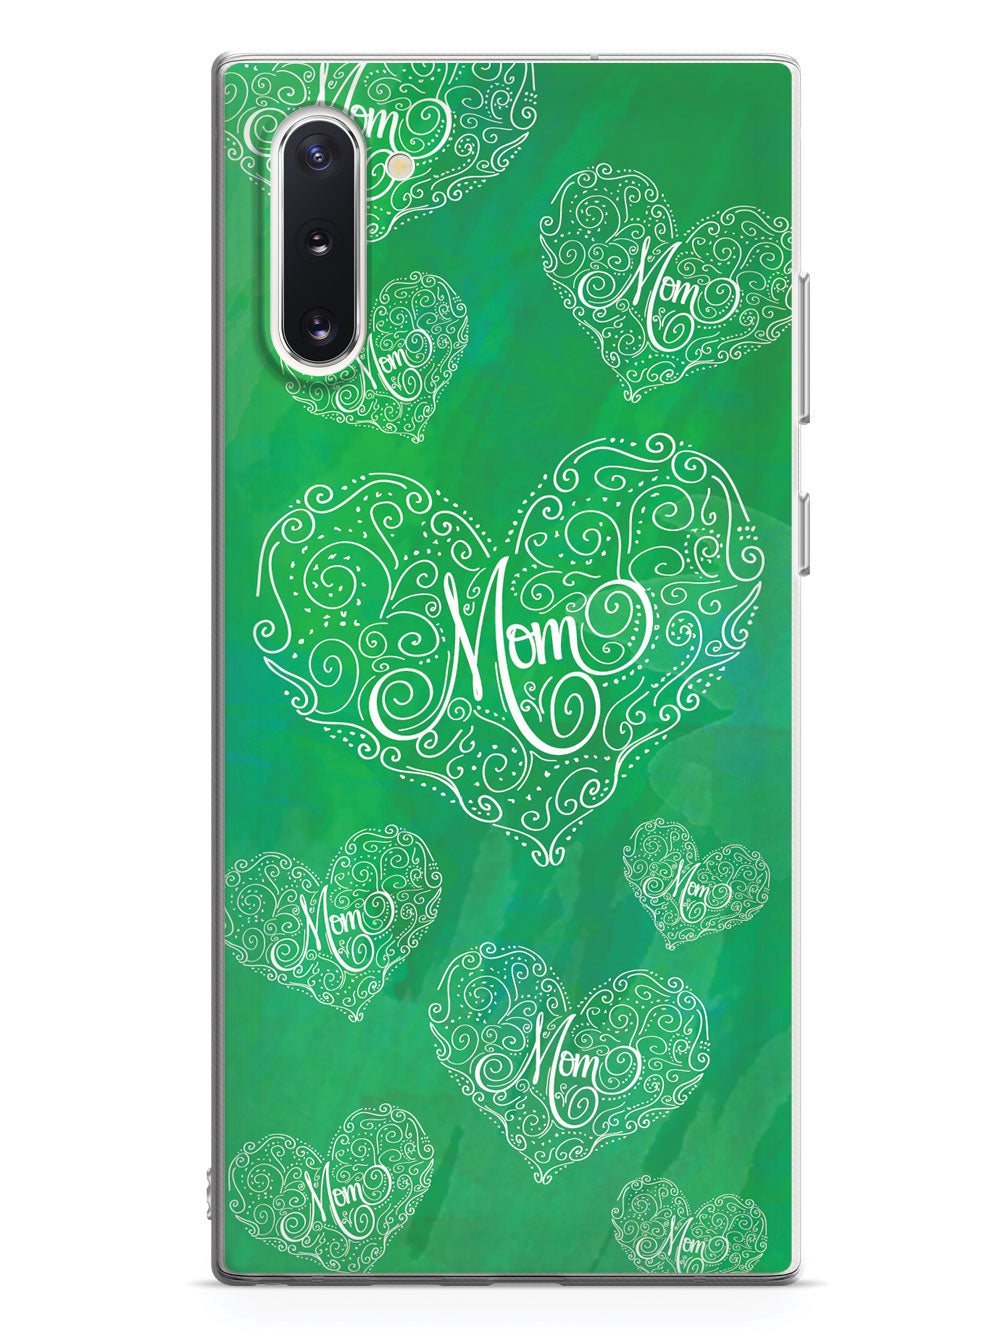 Mom Doodle Hearts - Green Case